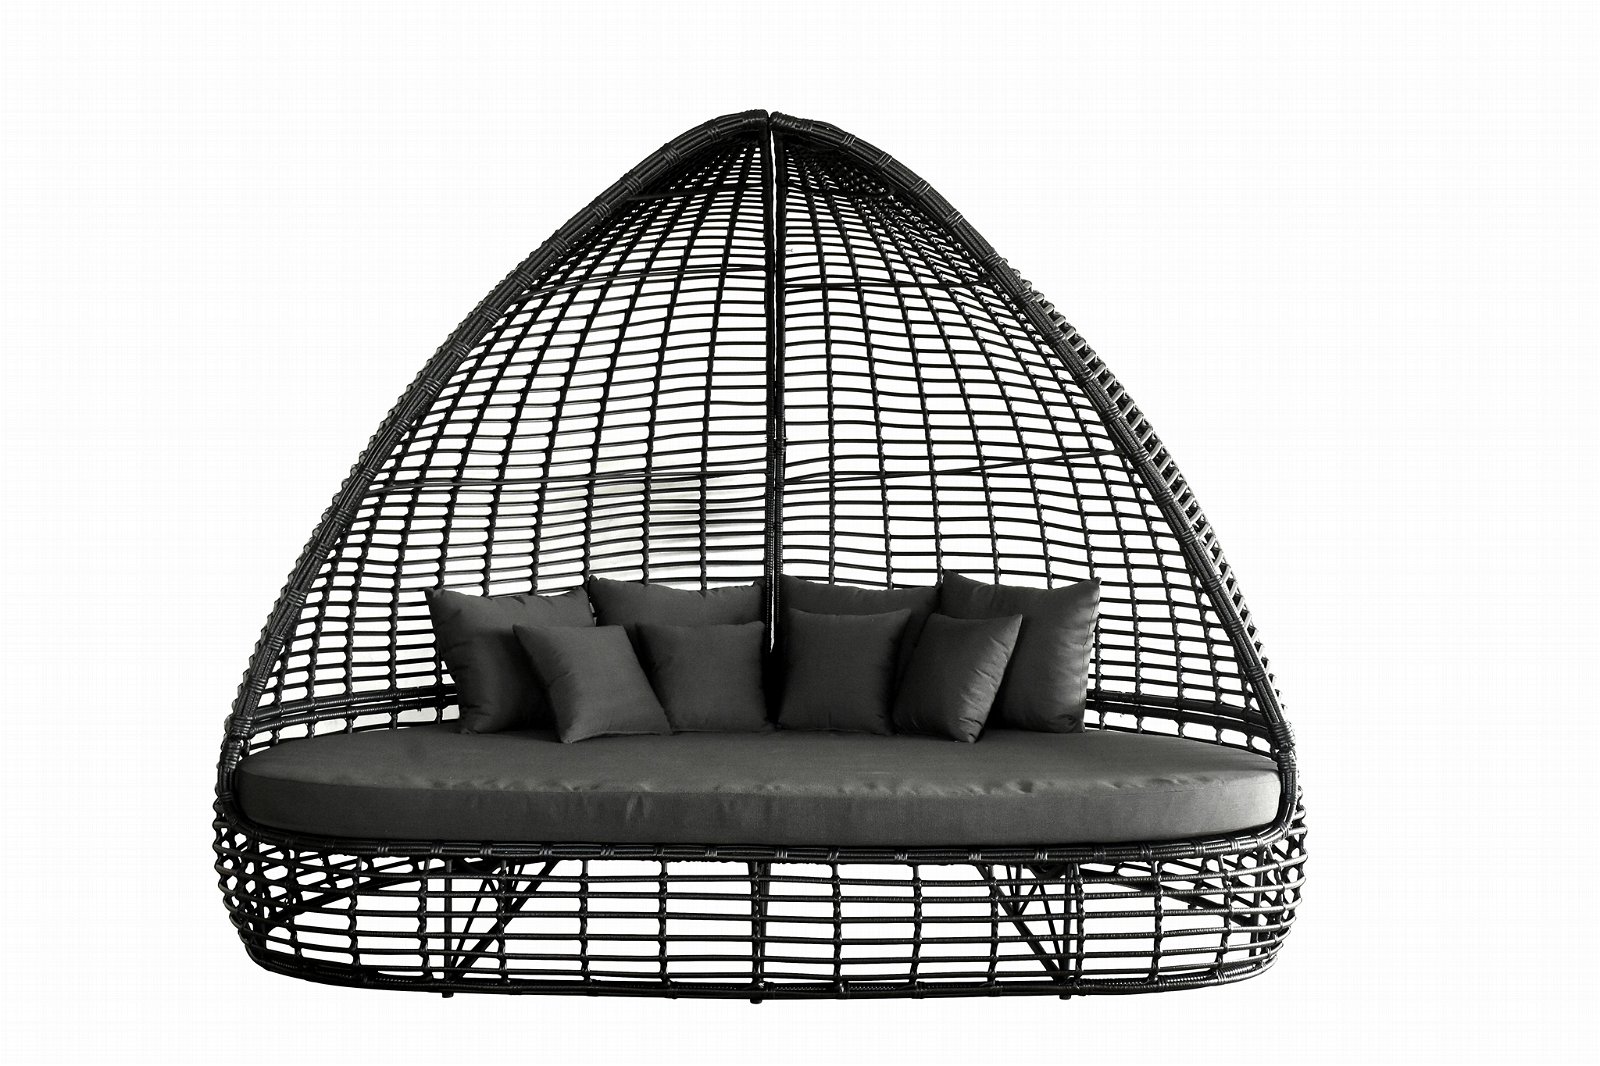 Hormel antique style rattan furniture poolside patio wicker outdoor daybed